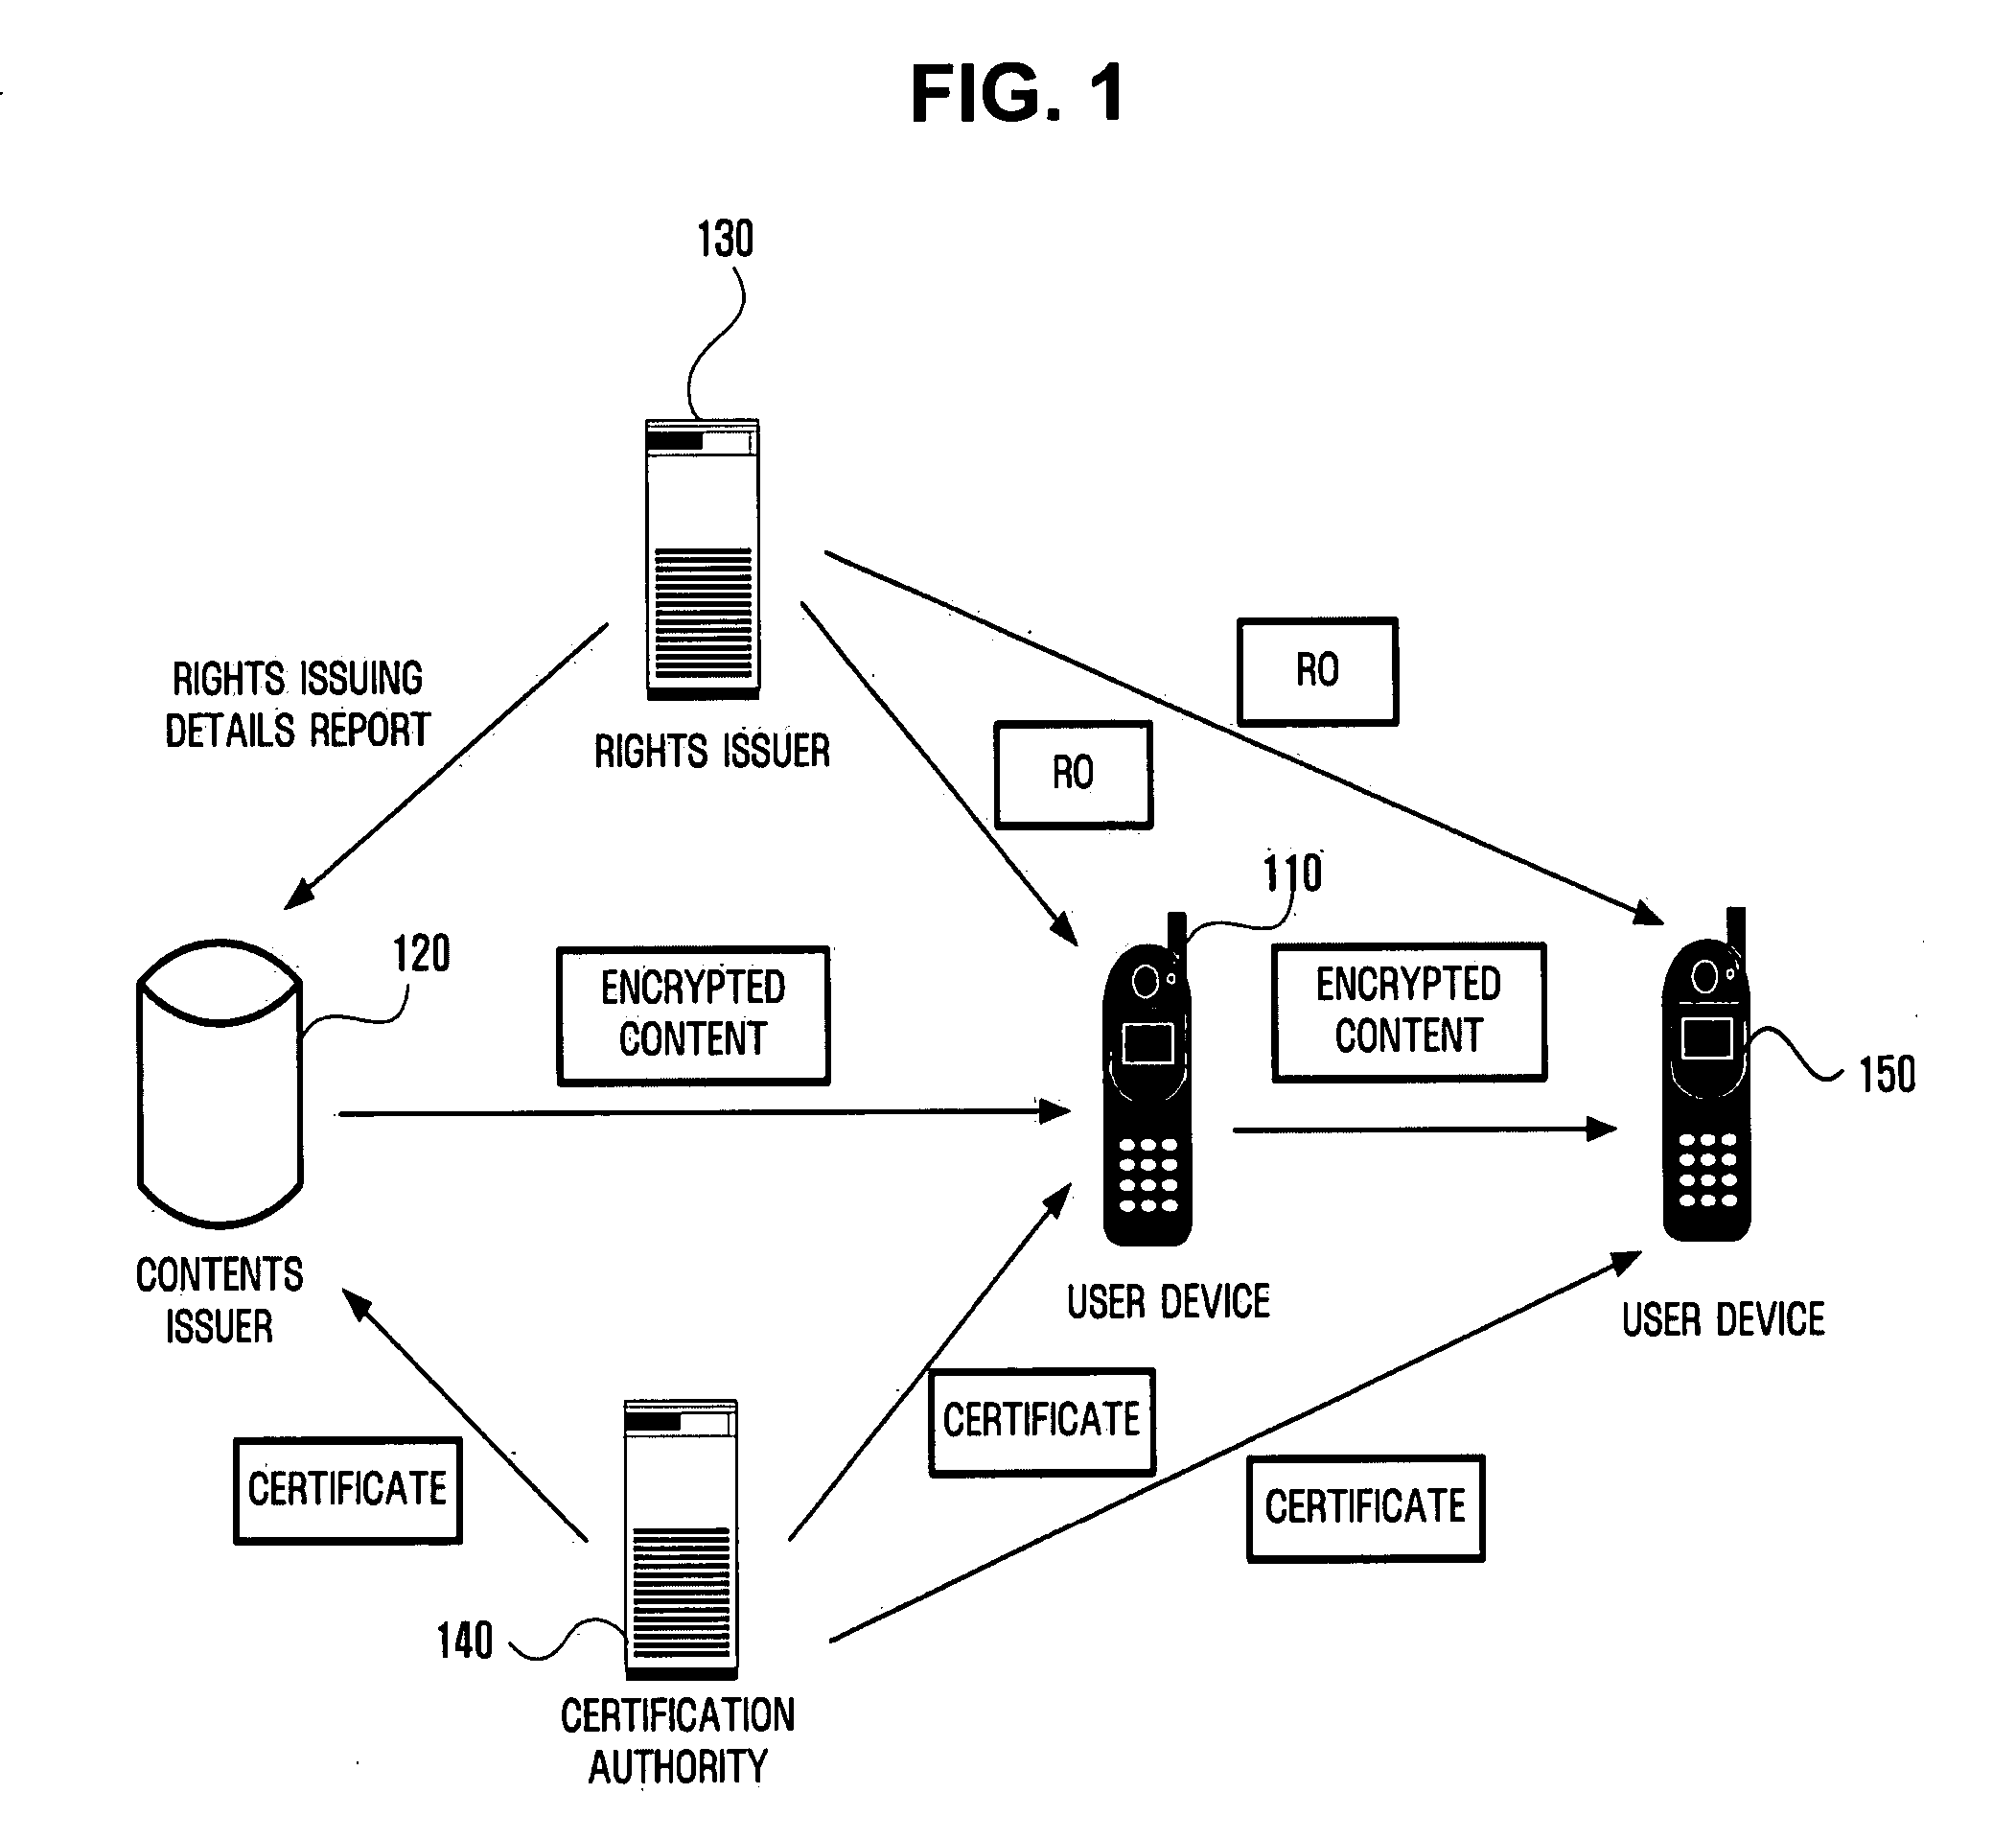 Apparatus and method for sending and receiving digital rights objects in converted format between device and portable storage